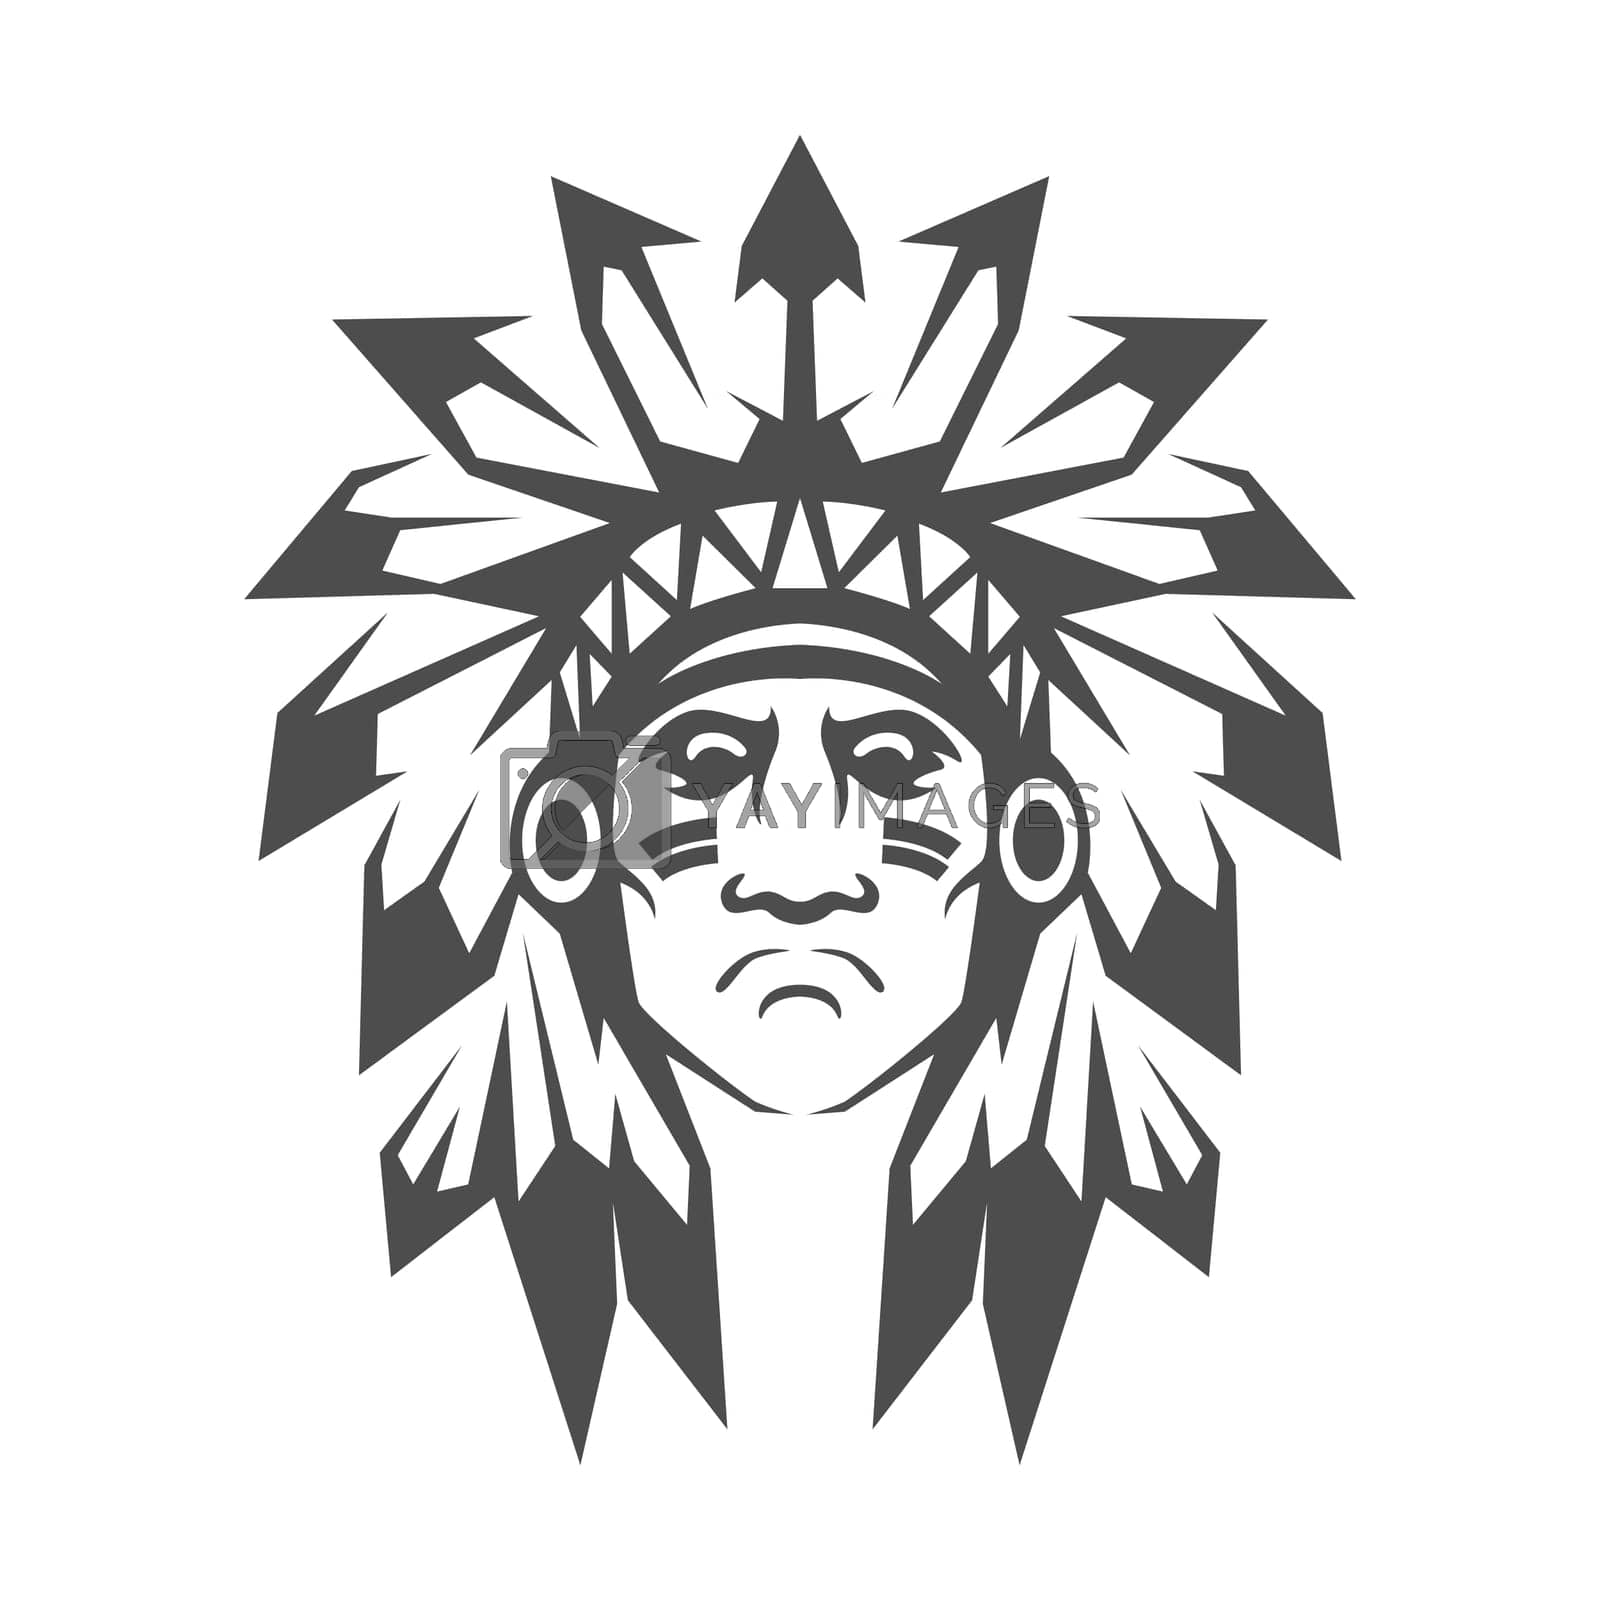 Royalty free image of Native American icon logo design by bellaxbudhong3